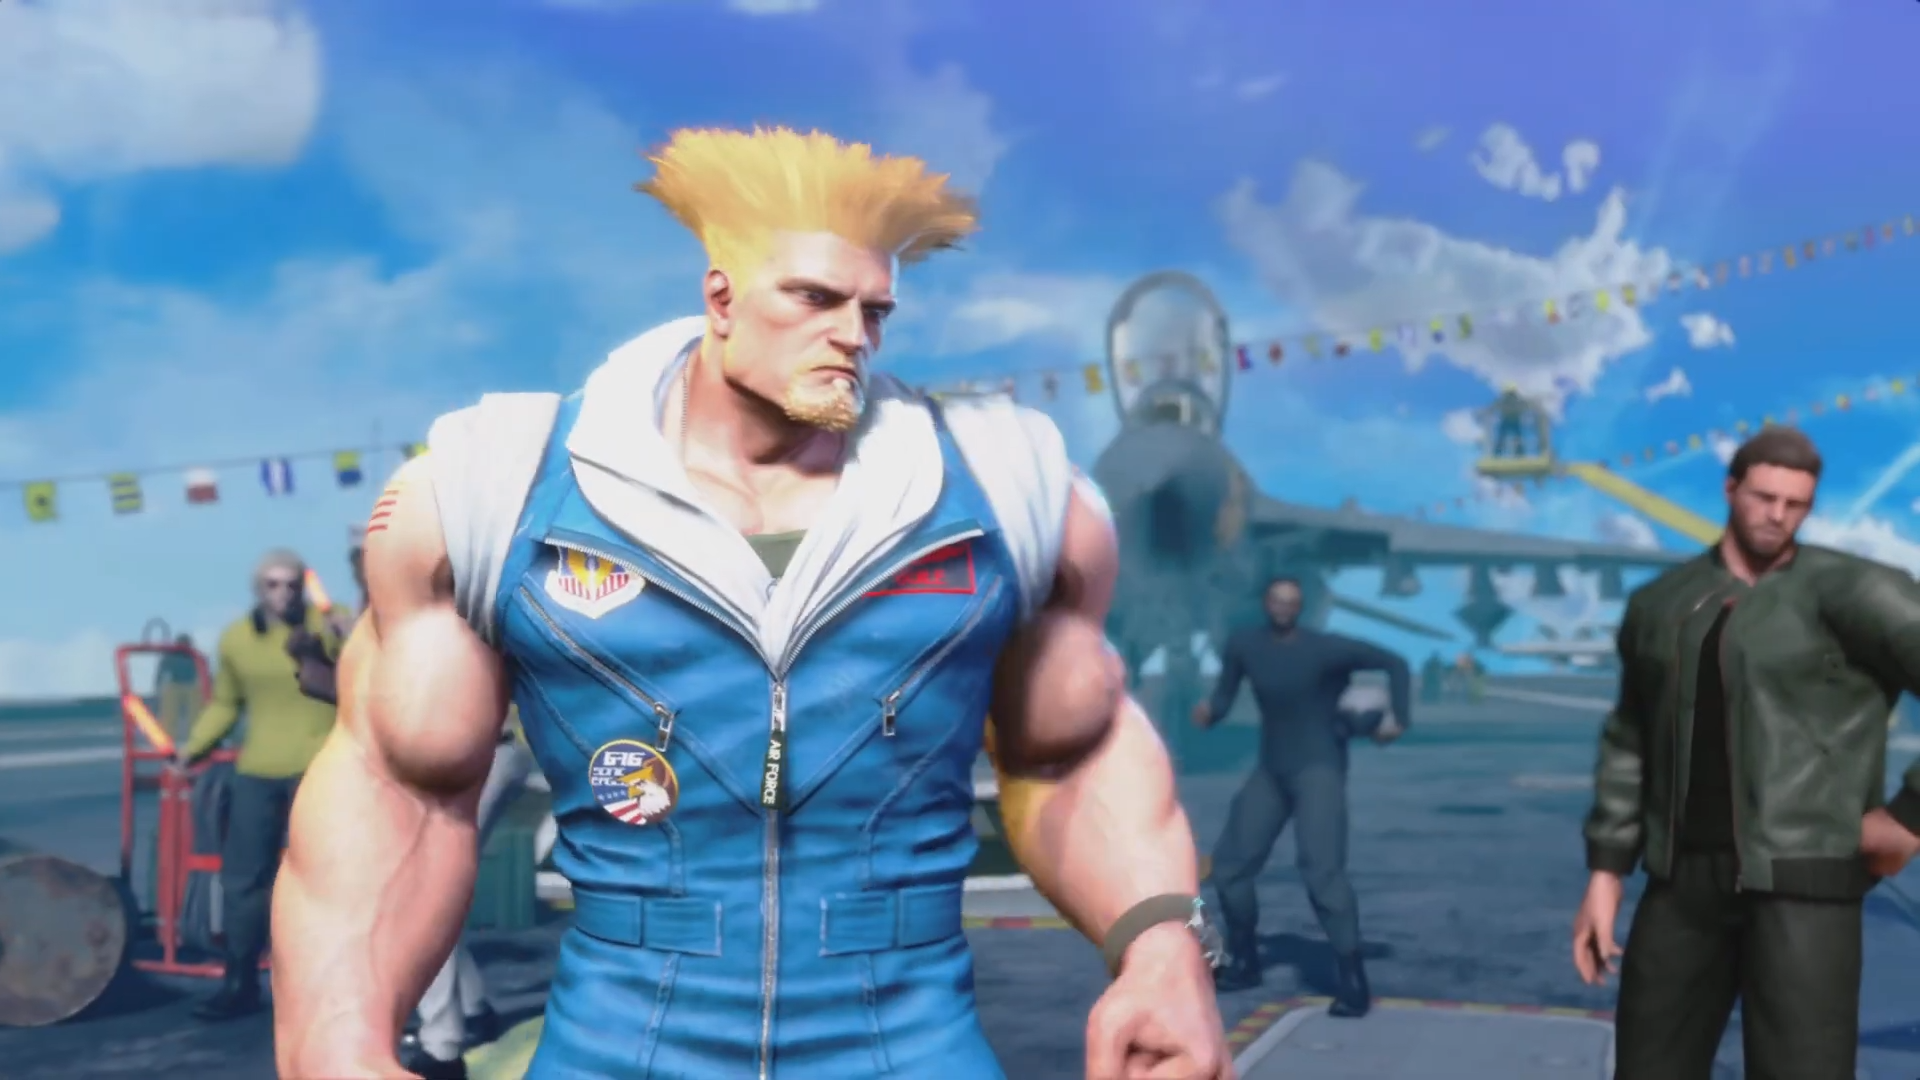 Street fighter 6 Guile : r/StreetFighter